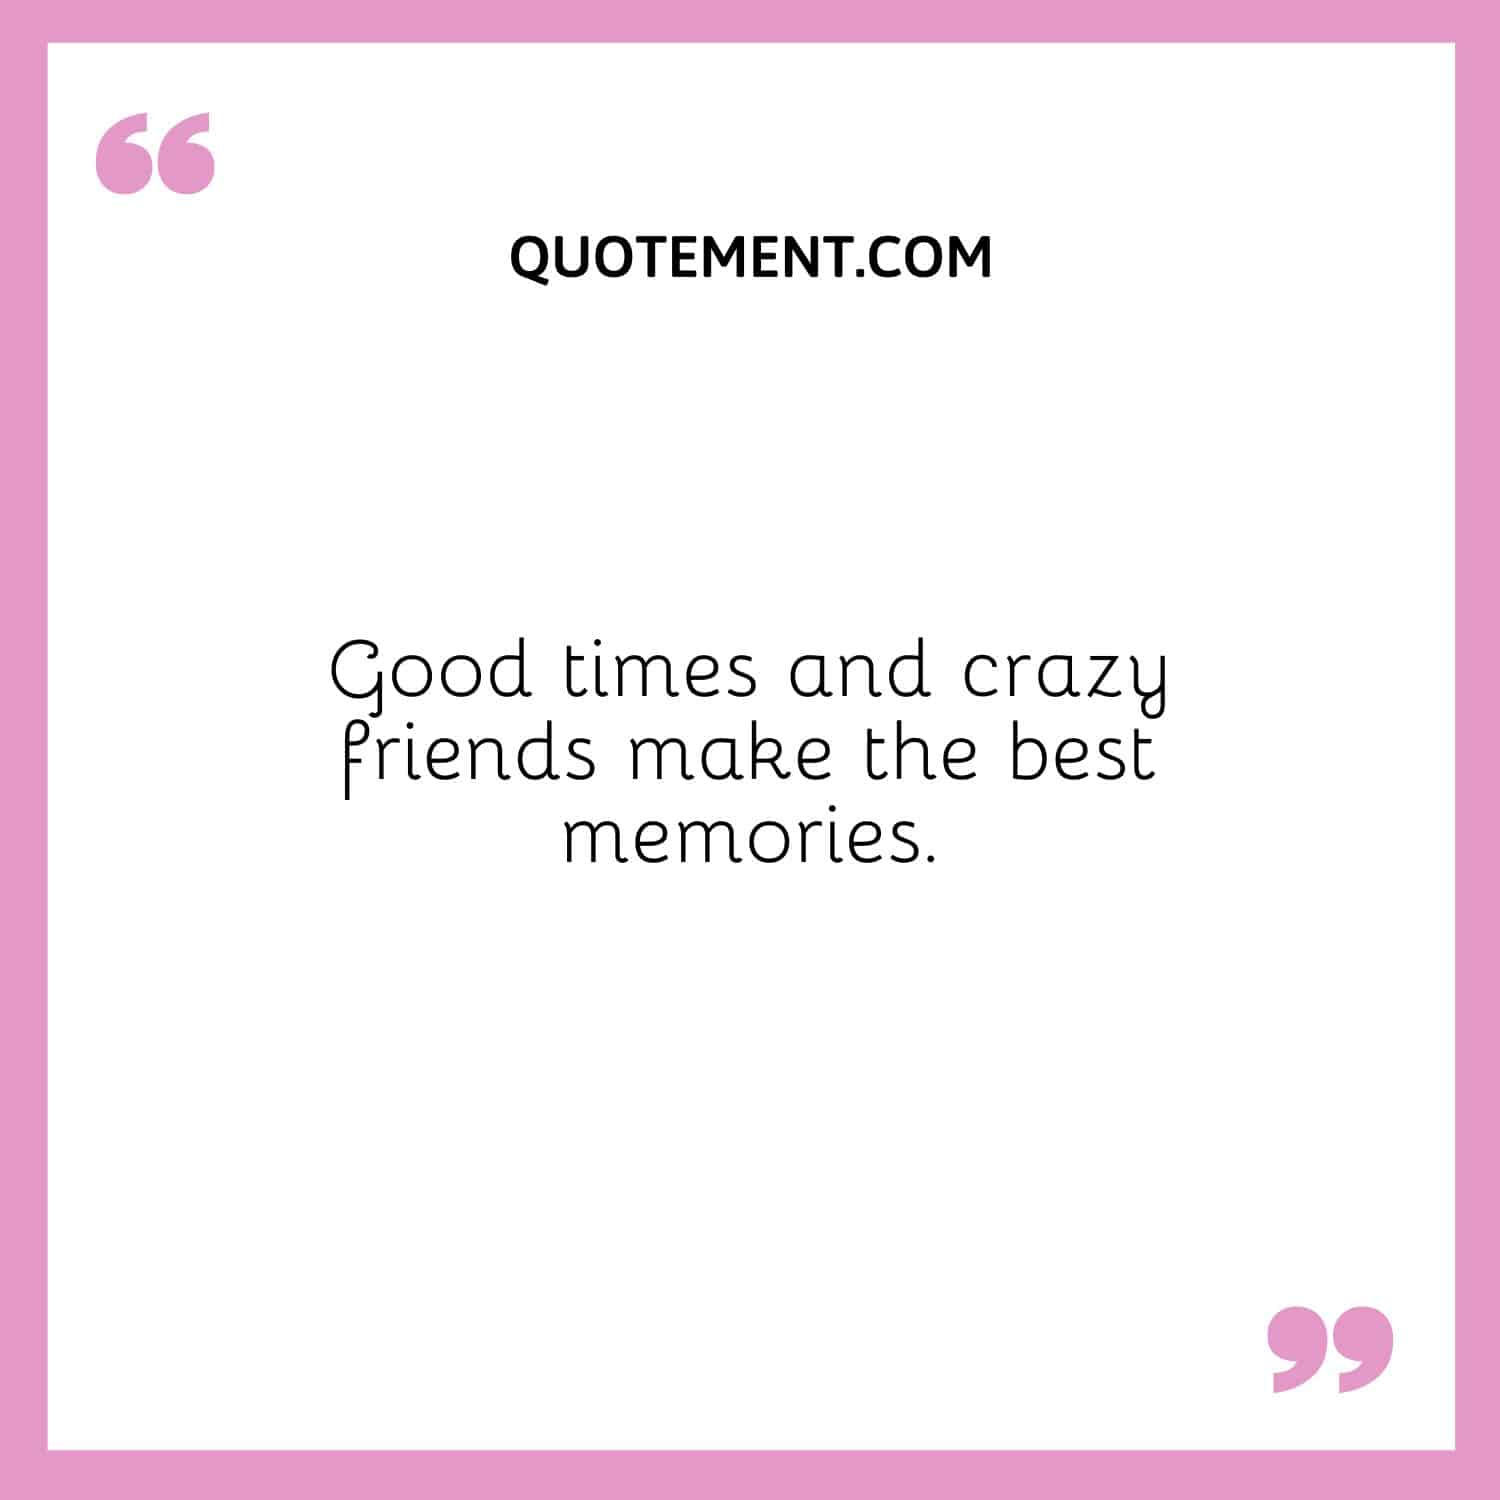 Good times and crazy friends make the best memories